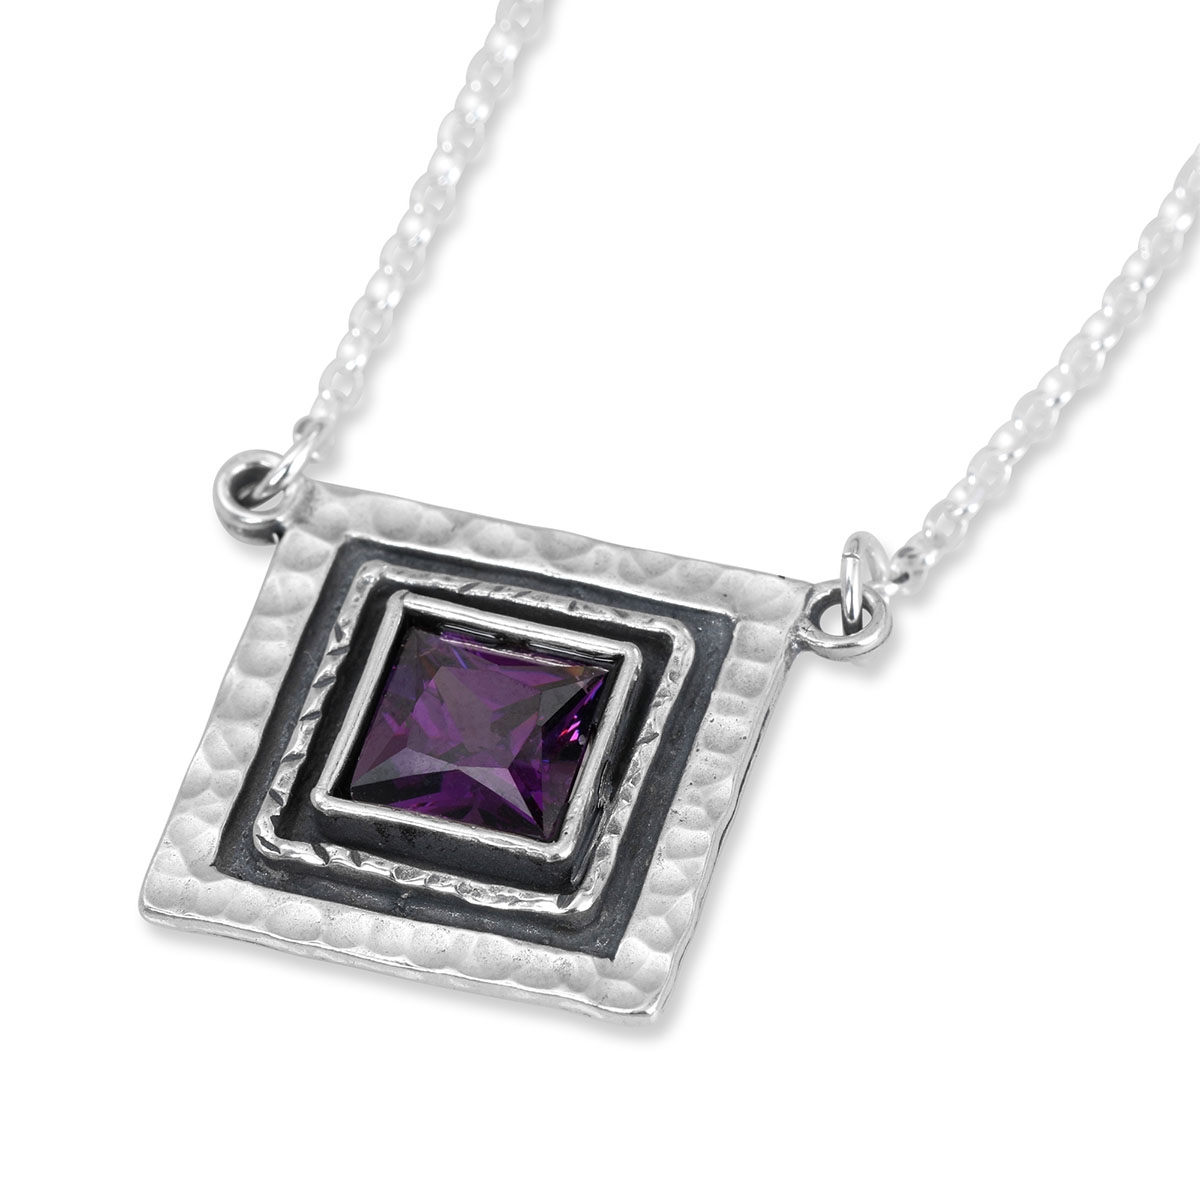 Rafael Jewelry Square Hammered Sterling Silver Necklace – Amethyst - 1